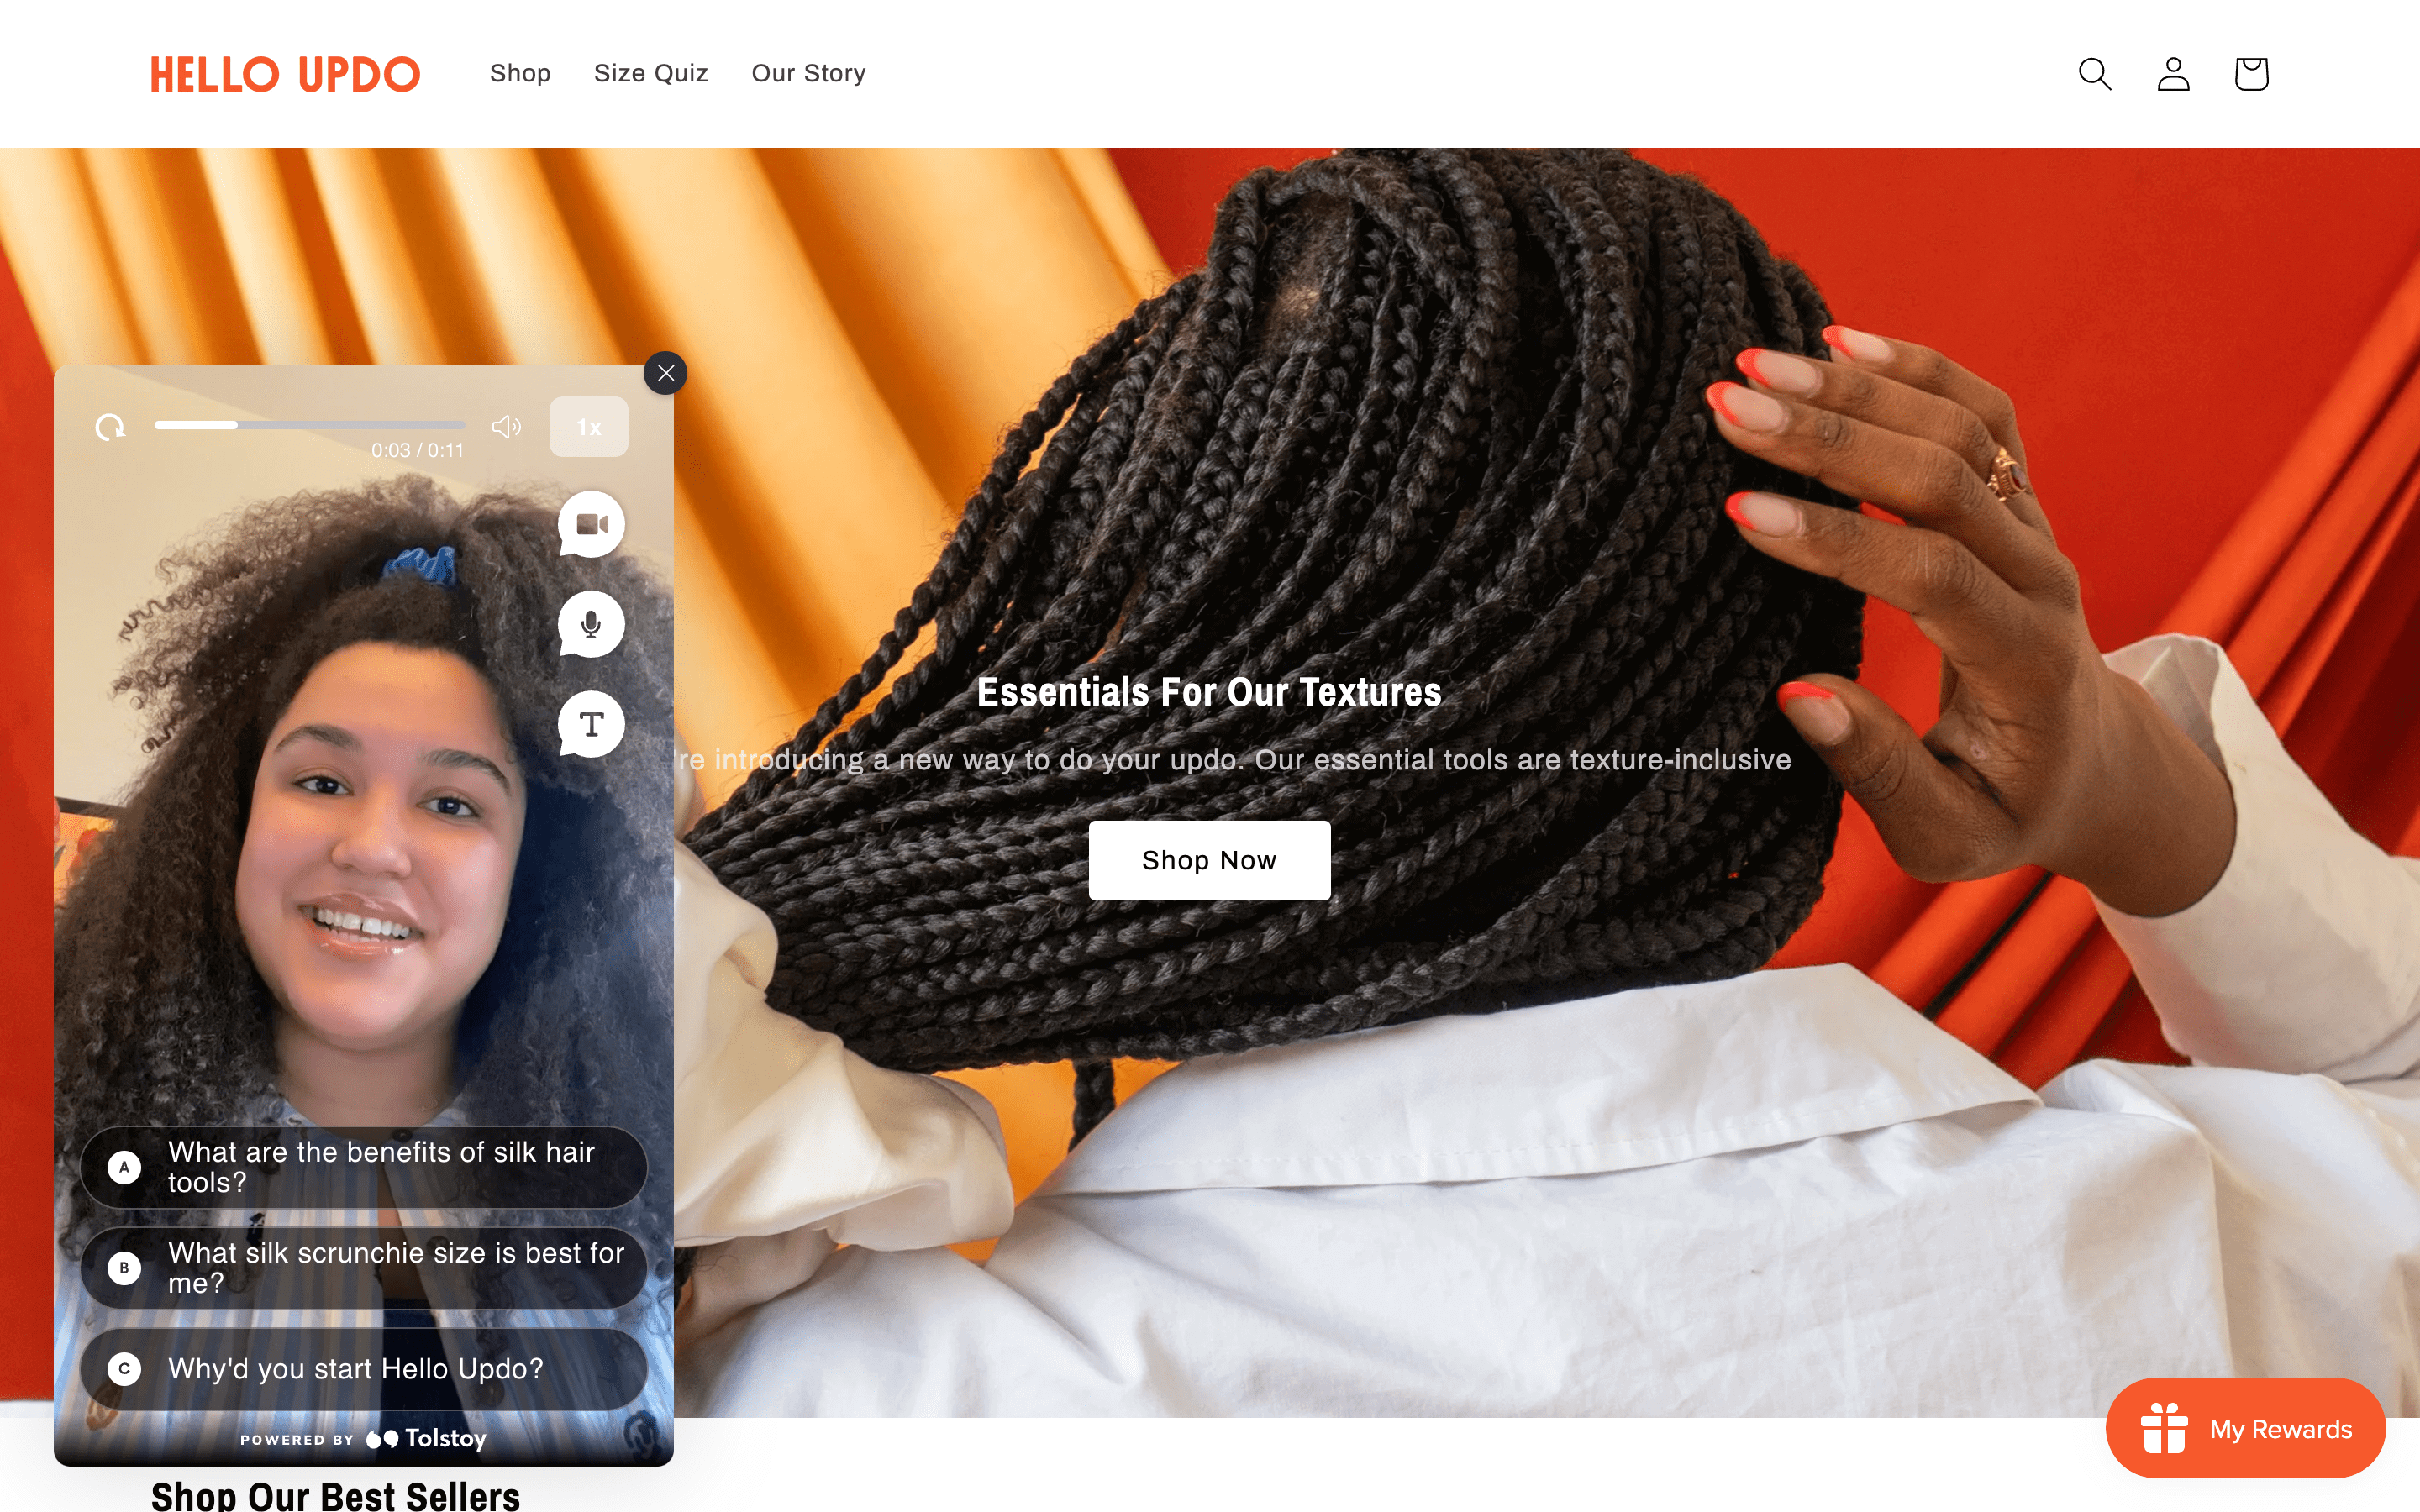 Women Ecommerce Entrepreneurs–A screenshot from Hello Updo’s homepage. There is an image of the back of a woman’s head with braids and a large silk scrunchie in her hair. The text on top reads, “Essentials For Our Texture”. On the left of the page, there is a video of Magdaline, the founder welcoming people to the website. 